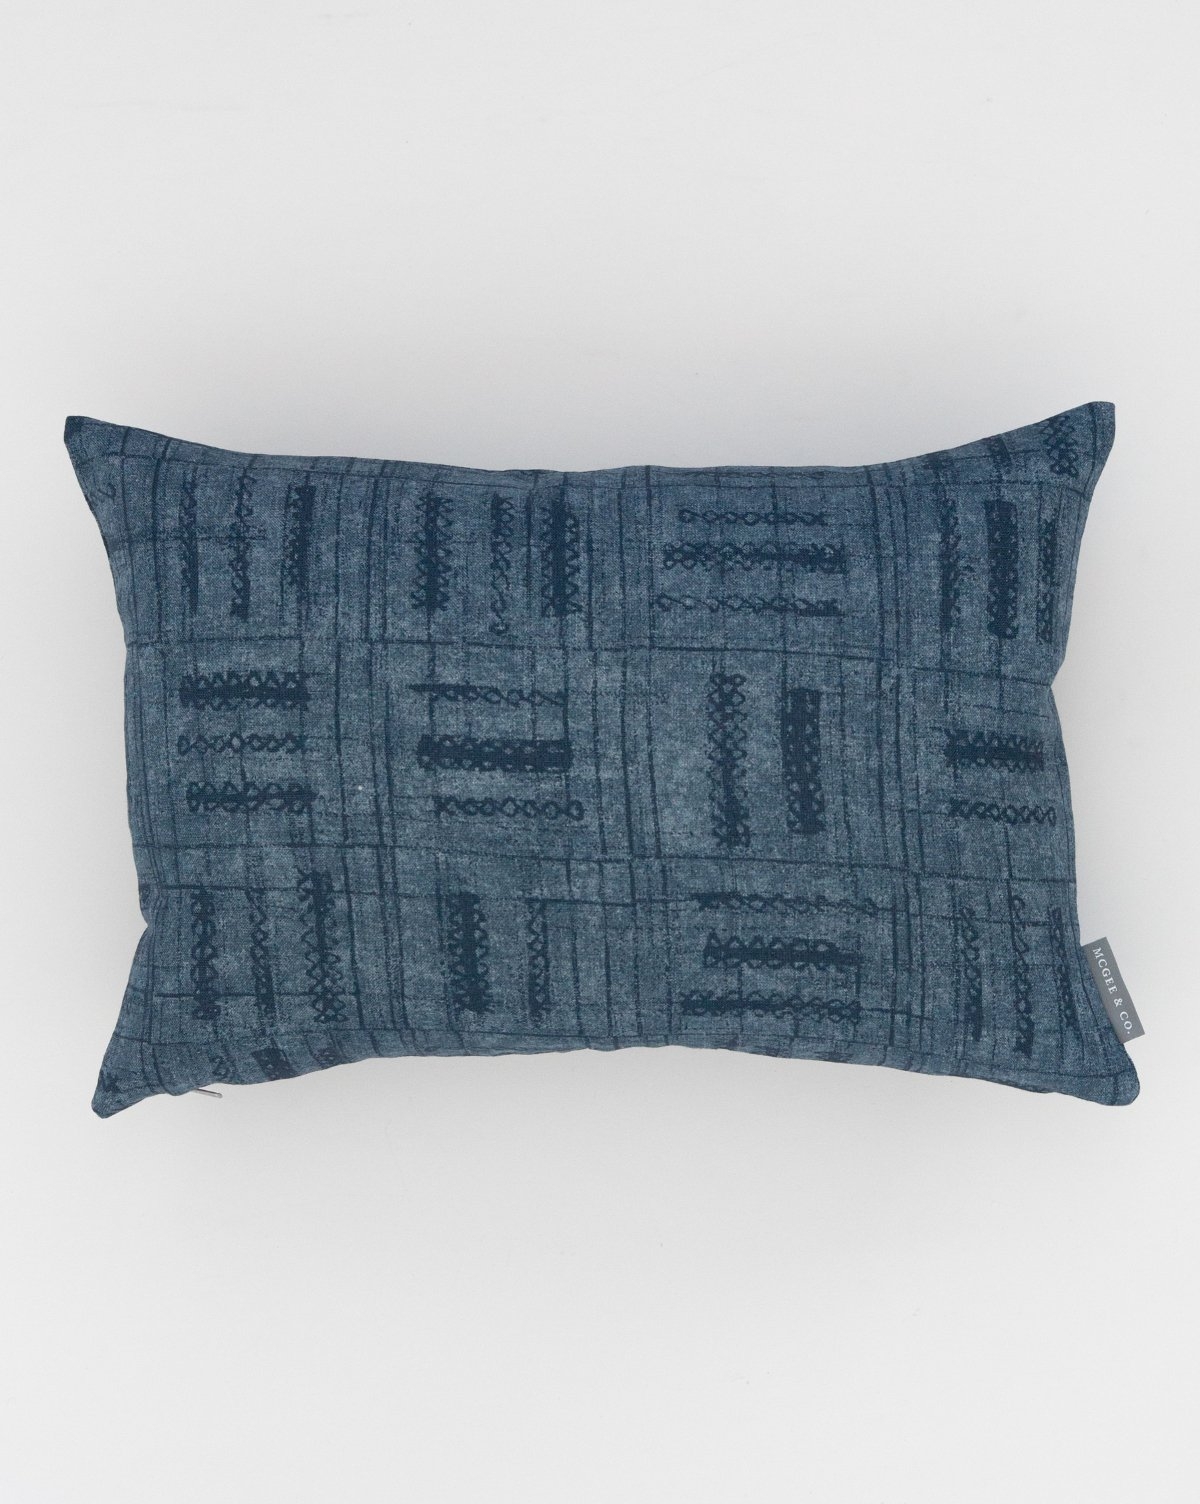 AMORET PILLOW WITHOUT INSERT, 12" x 24" - Image 2